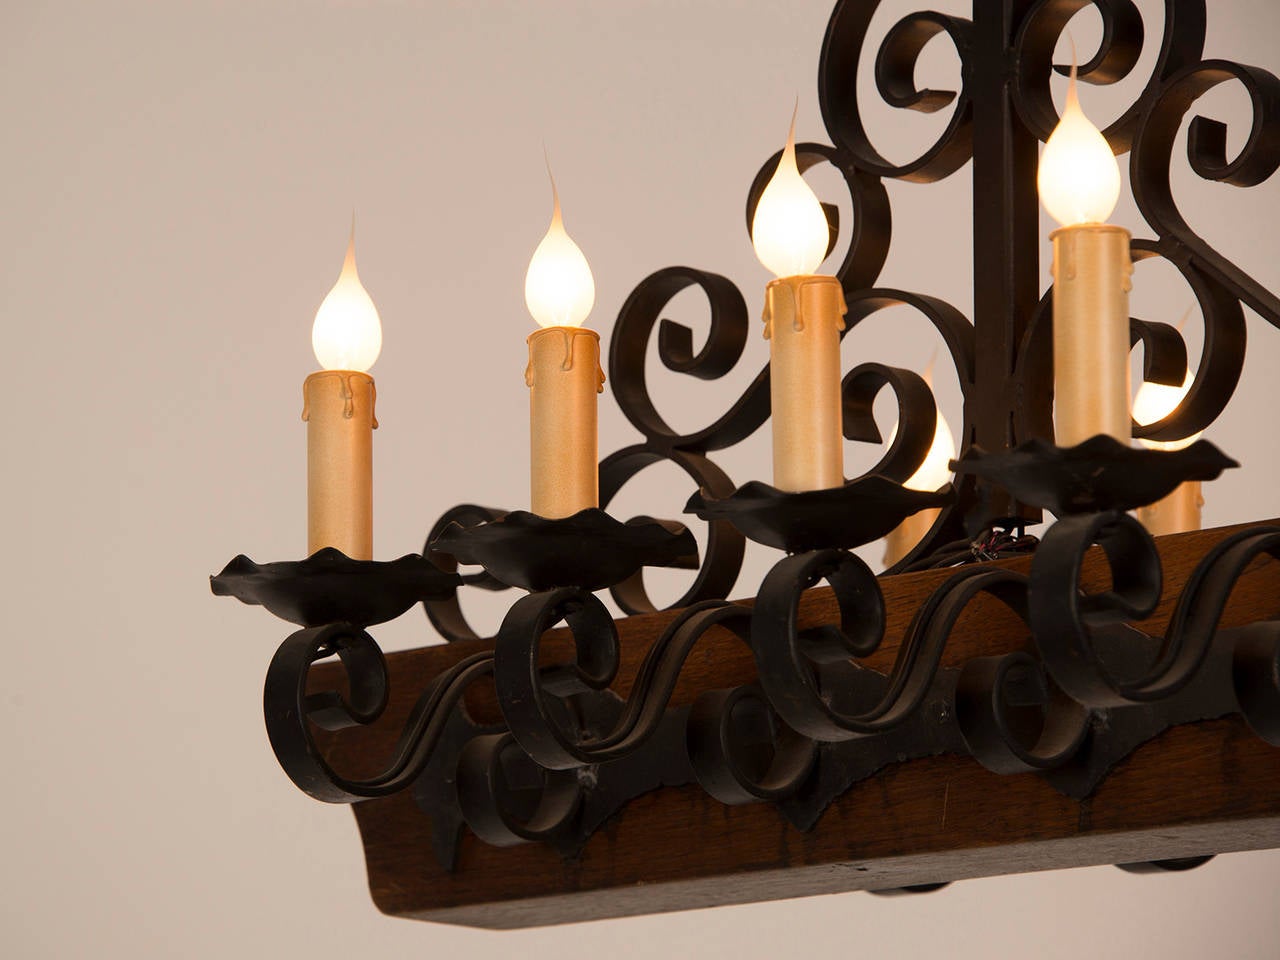 Mid-20th Century Decorative Chandelier with a Wooden Beam and Iron Candle Arms, France circa 1950 For Sale